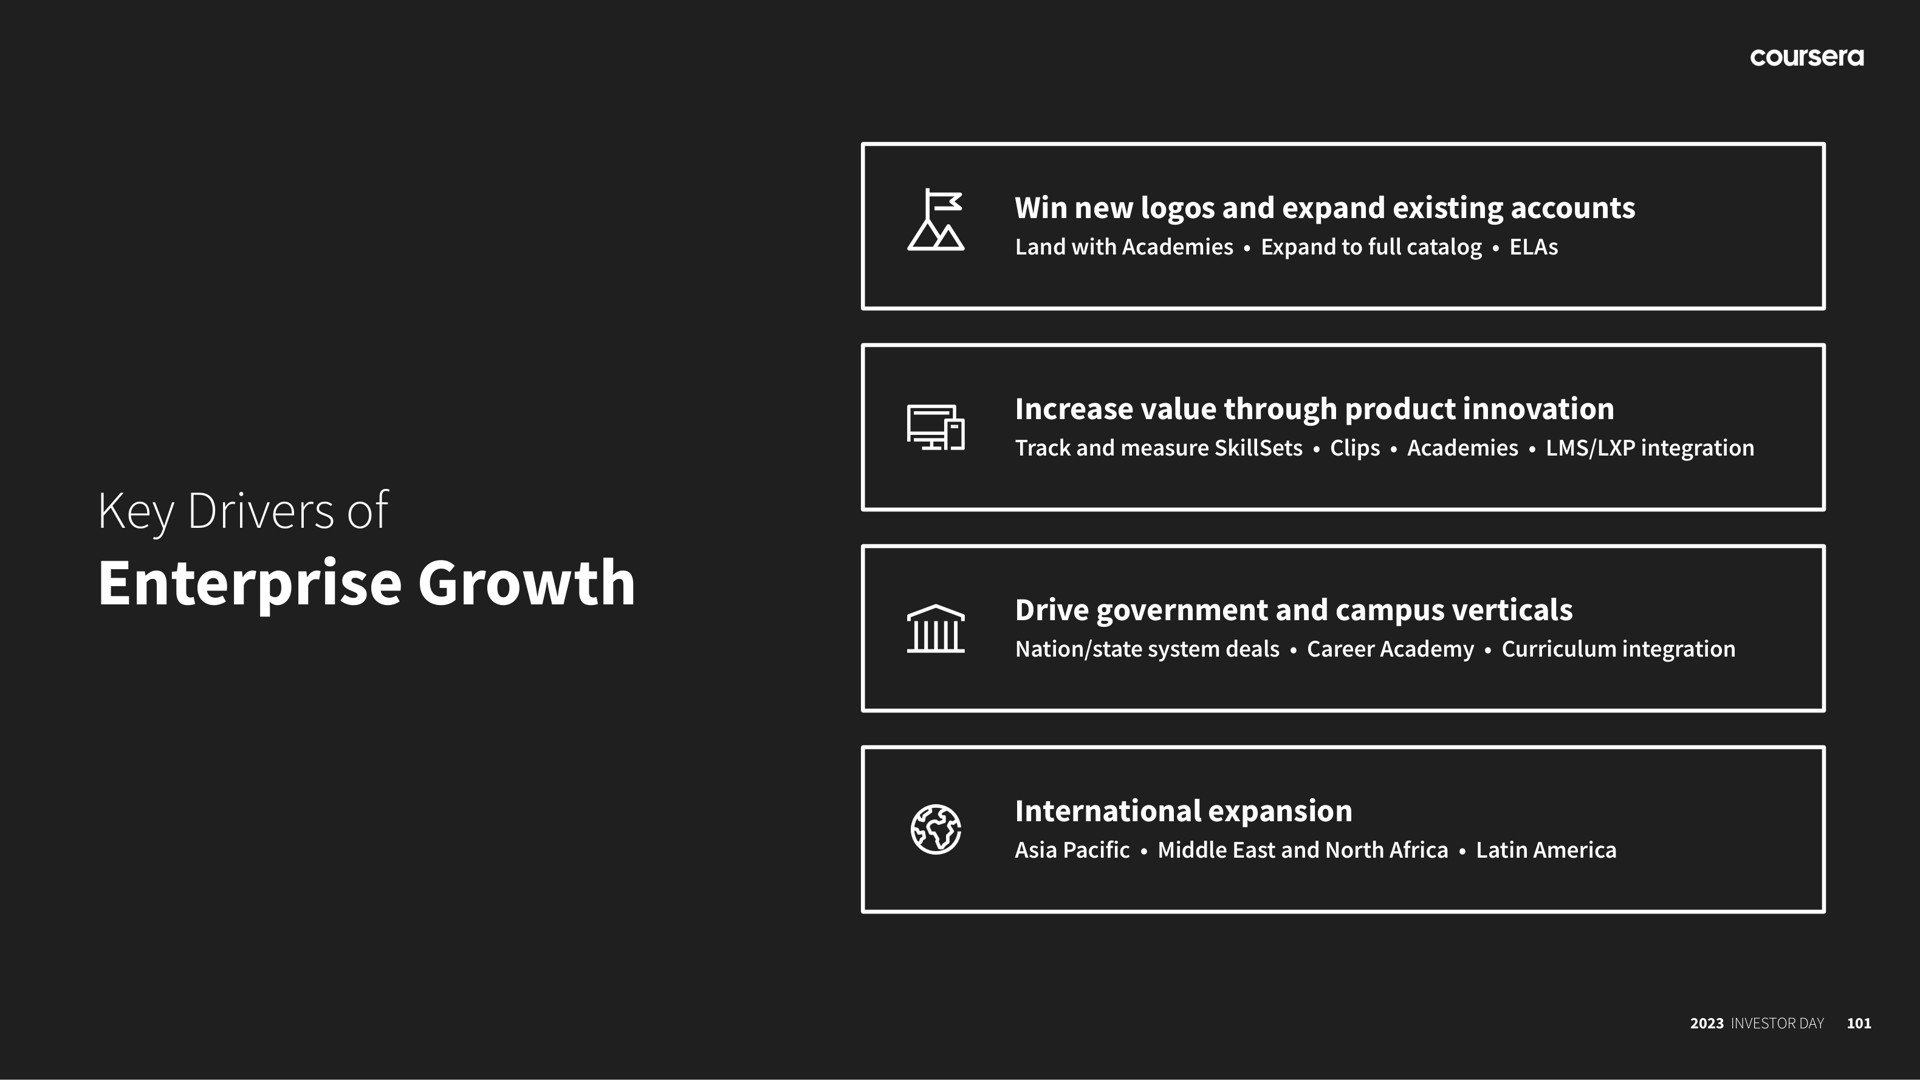 key drivers of enterprise growth tale col | Coursera